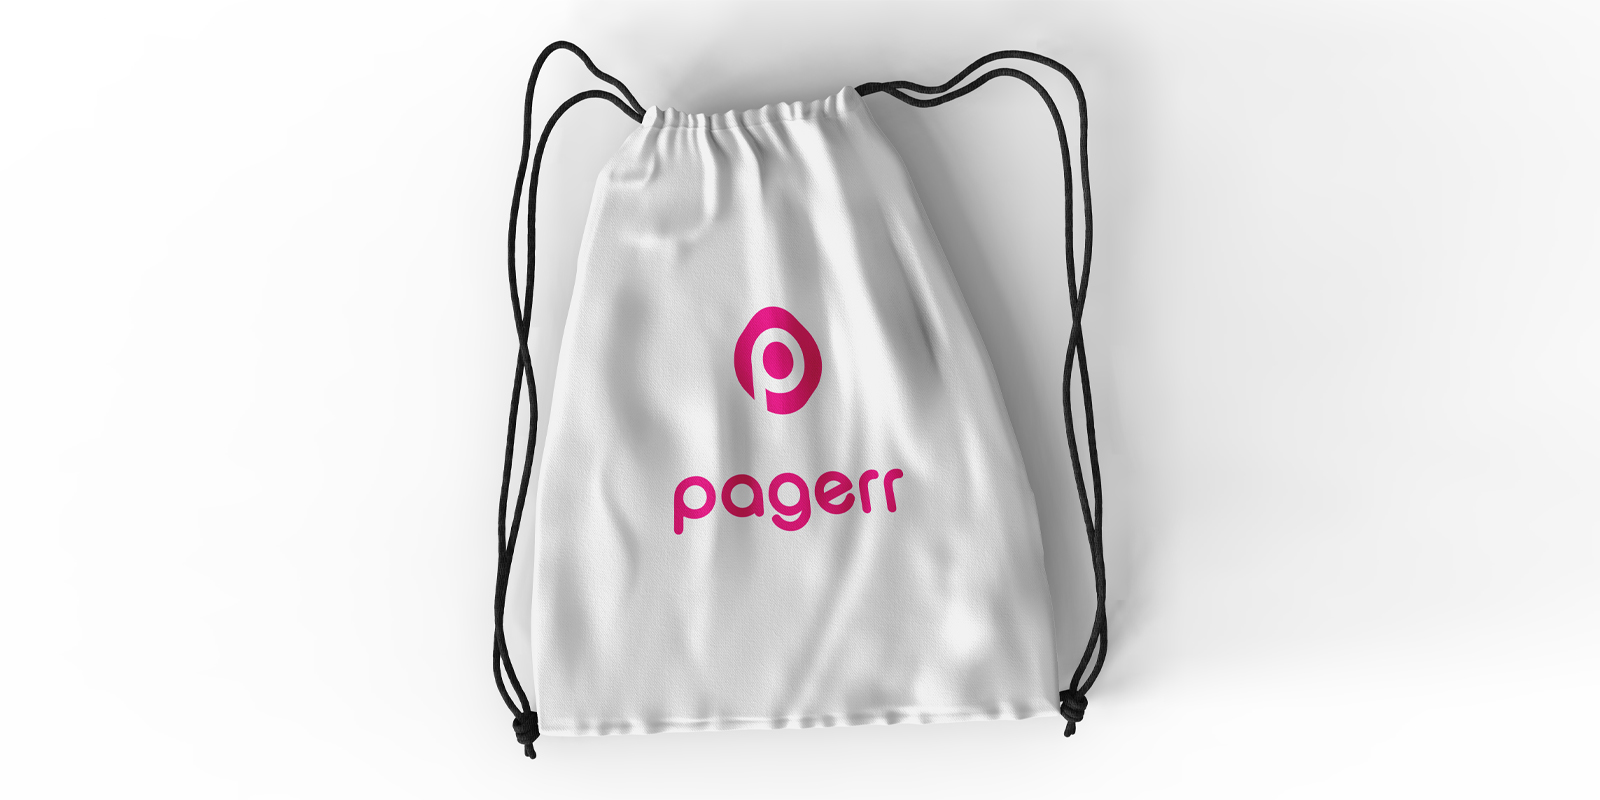 Drawstring backpacks in Geelong - Print with Pagerr